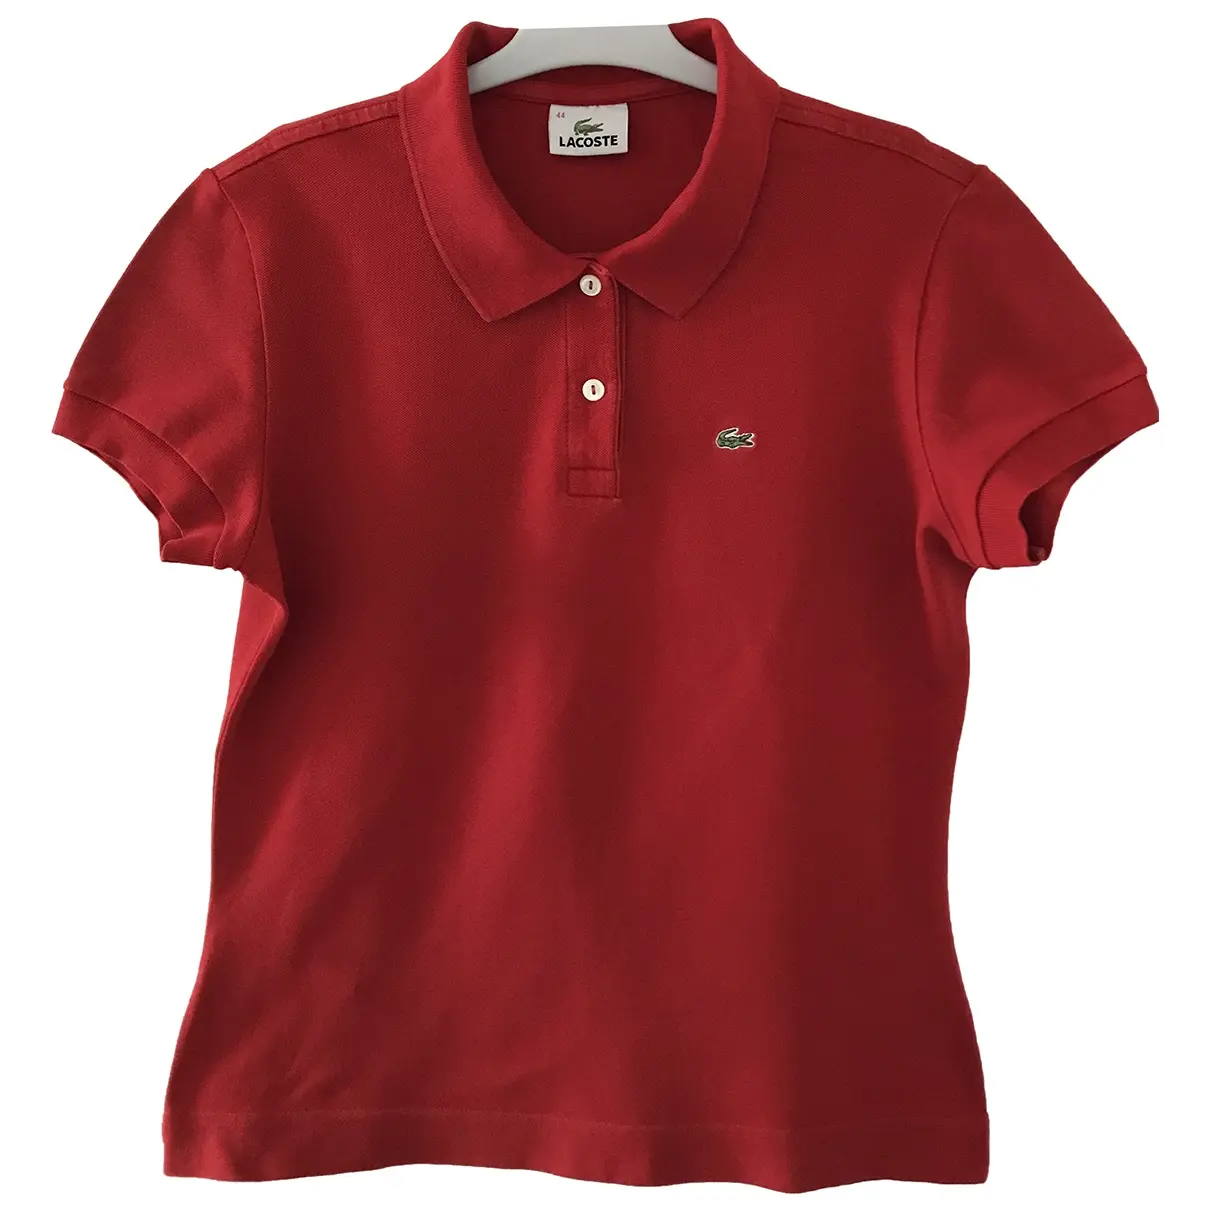 Red Cotton Top Lacoste